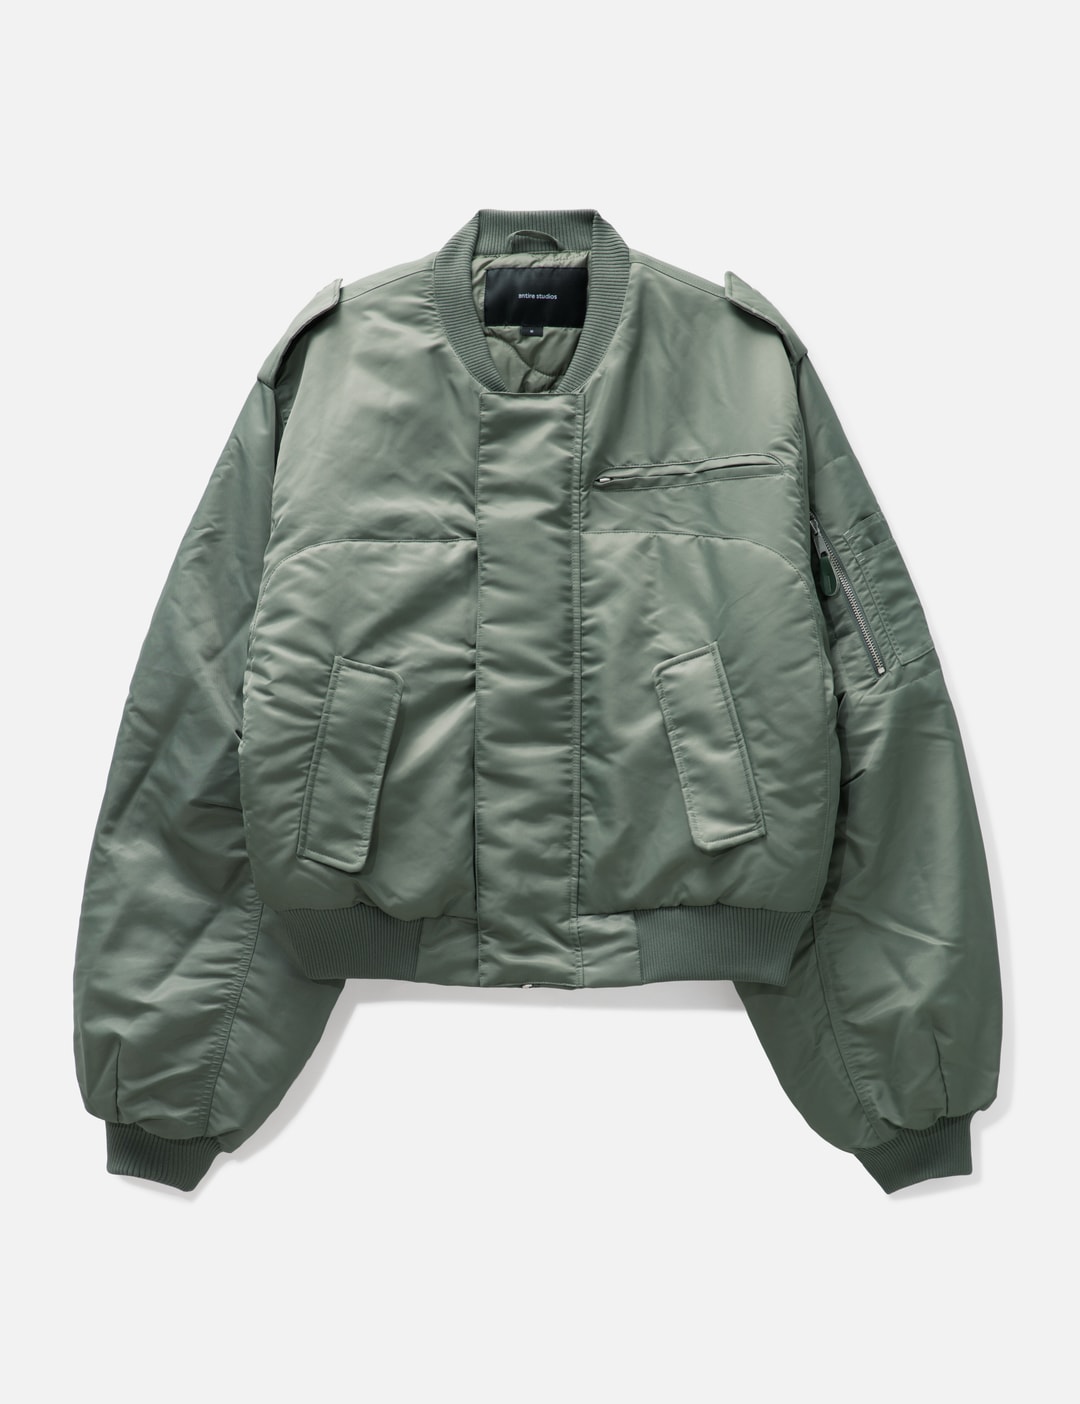 Entire Studios - A-2 Bomber Jacket | HBX - Globally Curated Fashion and ...